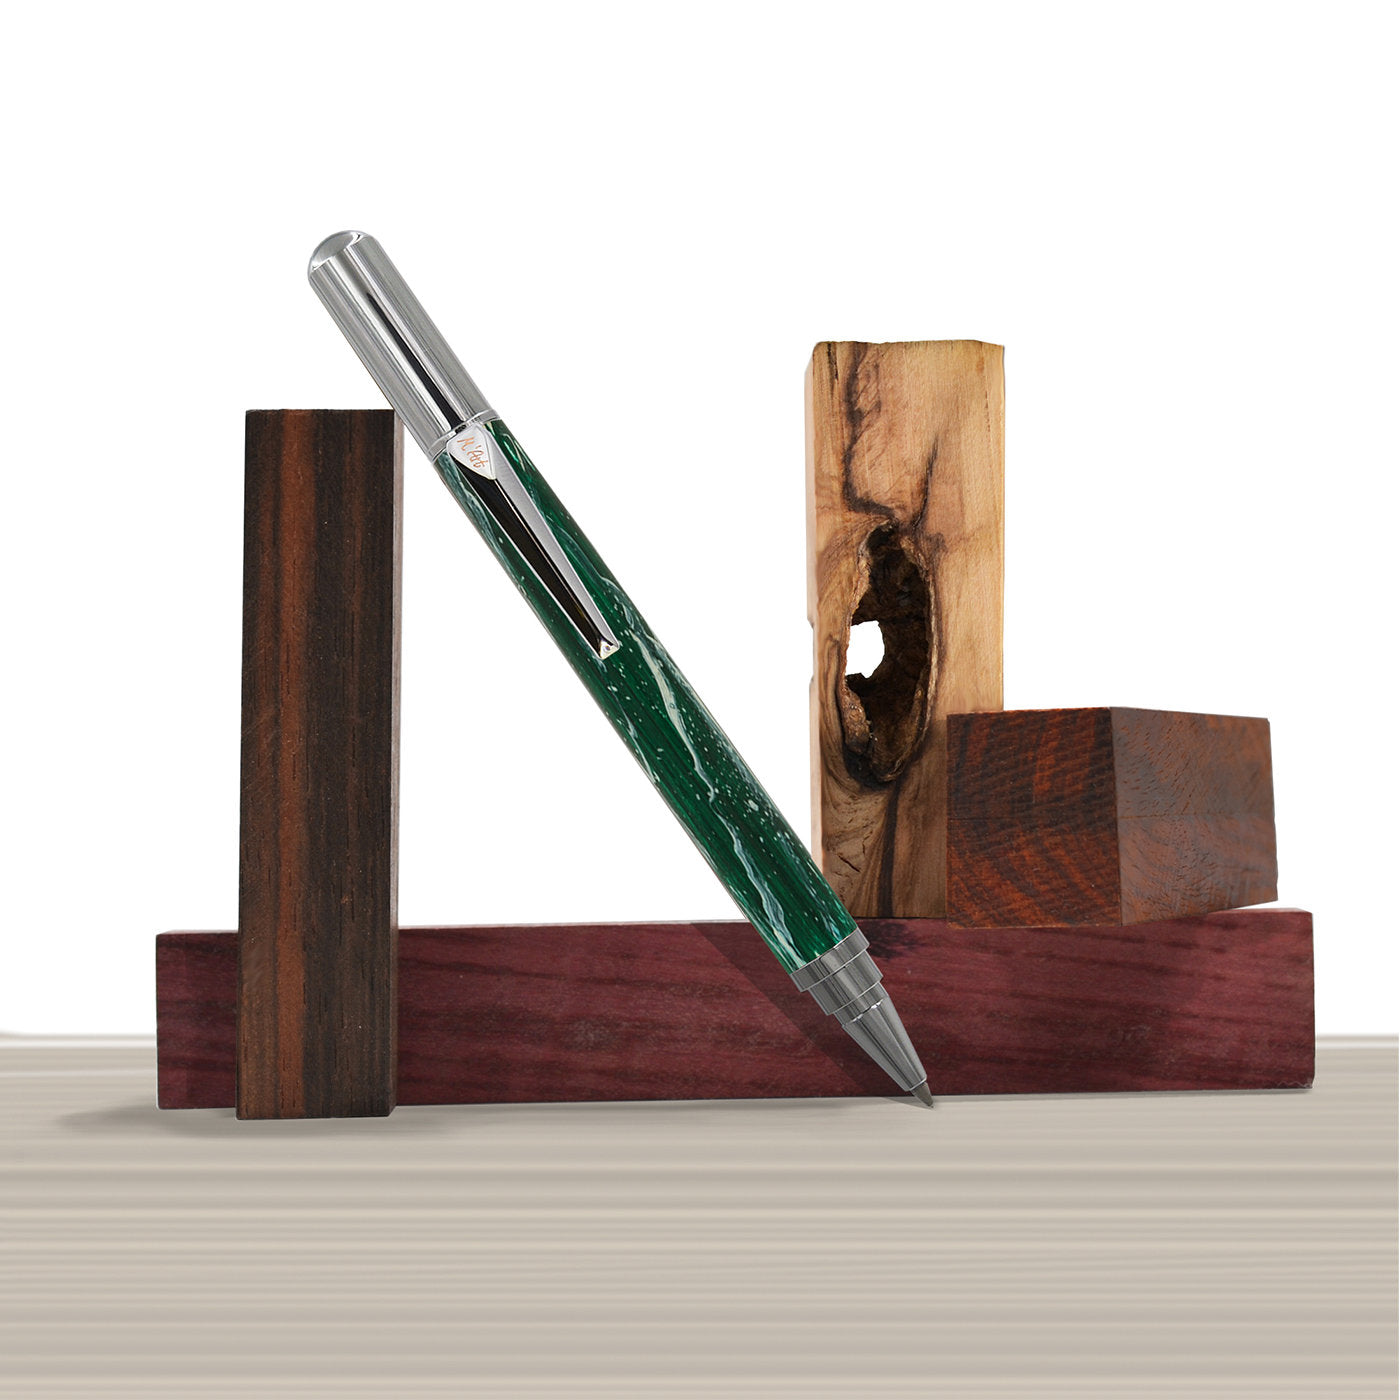 Matera Marbled Green Roller Pen in Olive Wood - Alternative view 2